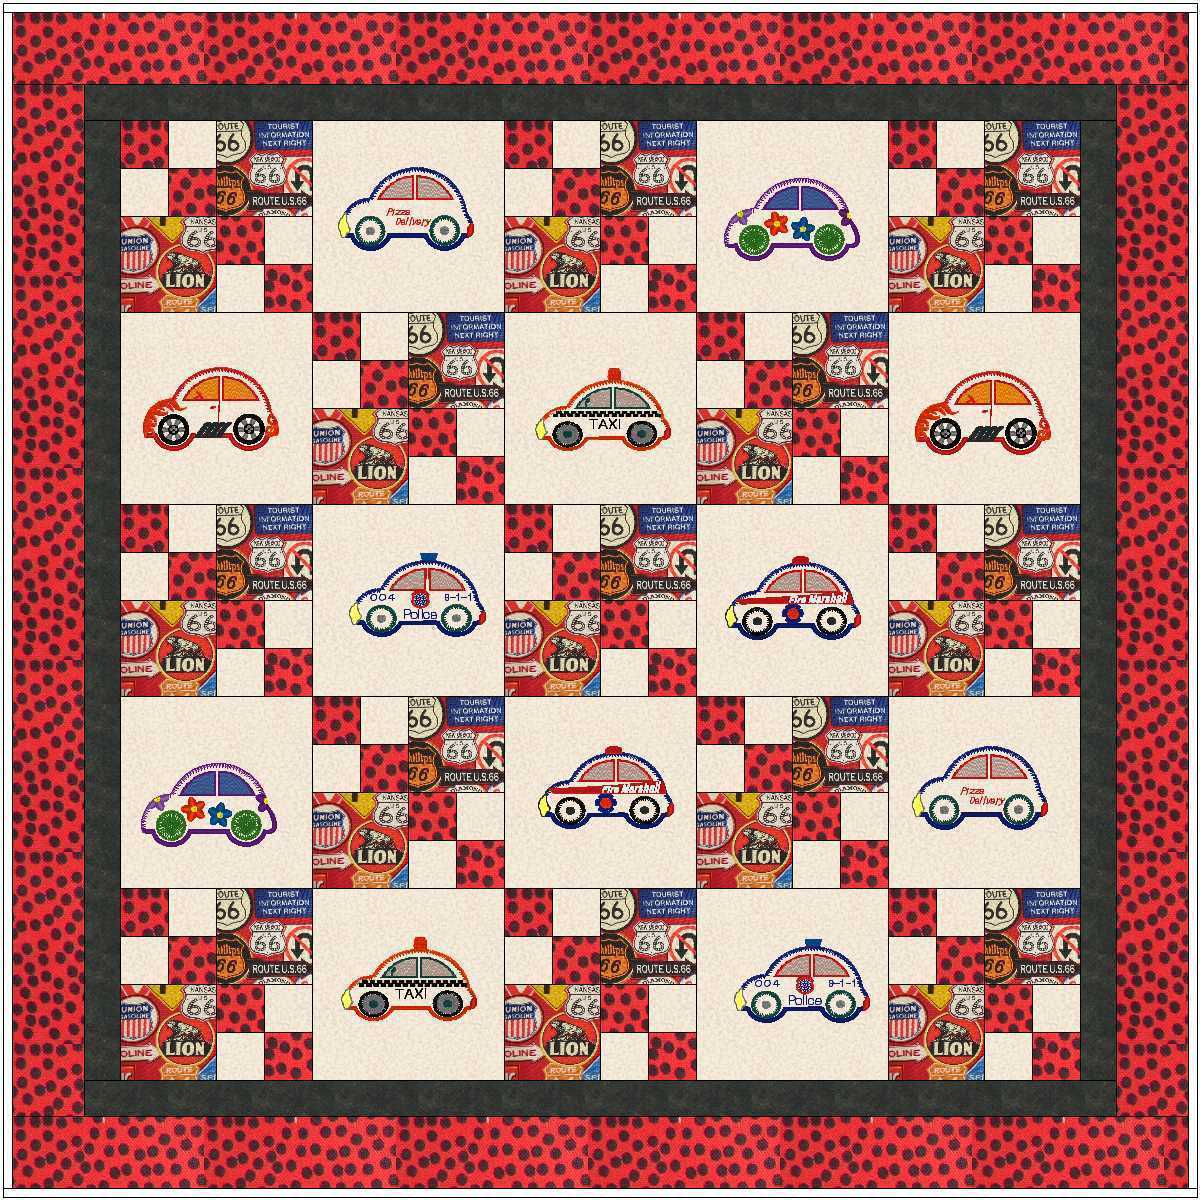 Machine Embroidery Quilt Patterns Cute Car Machine Embroidery Ba Quilt Accuquilt Patterns Empoto